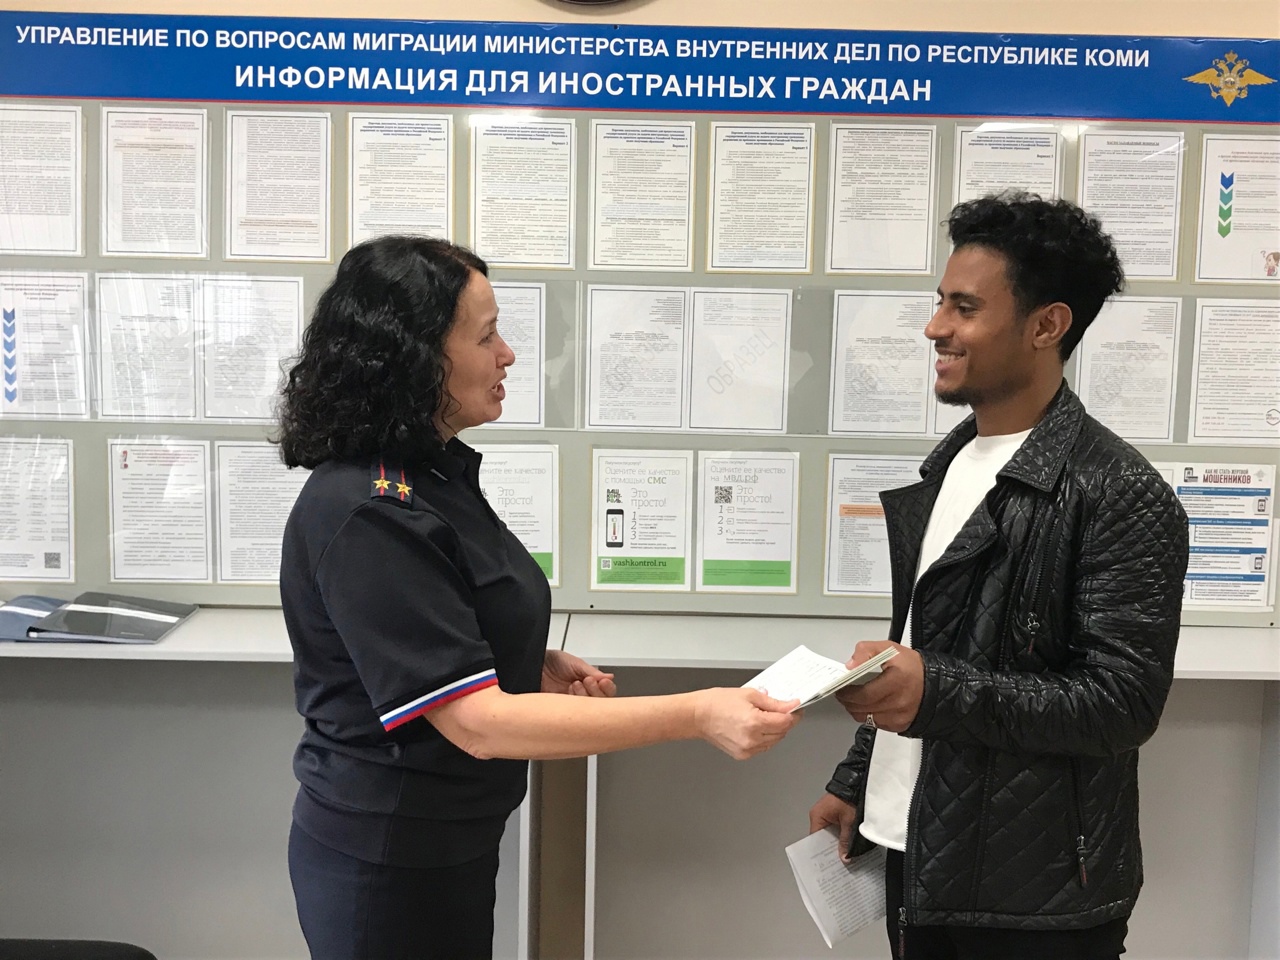 The first foreign student of the university received temporary residence permit for the entire period of study